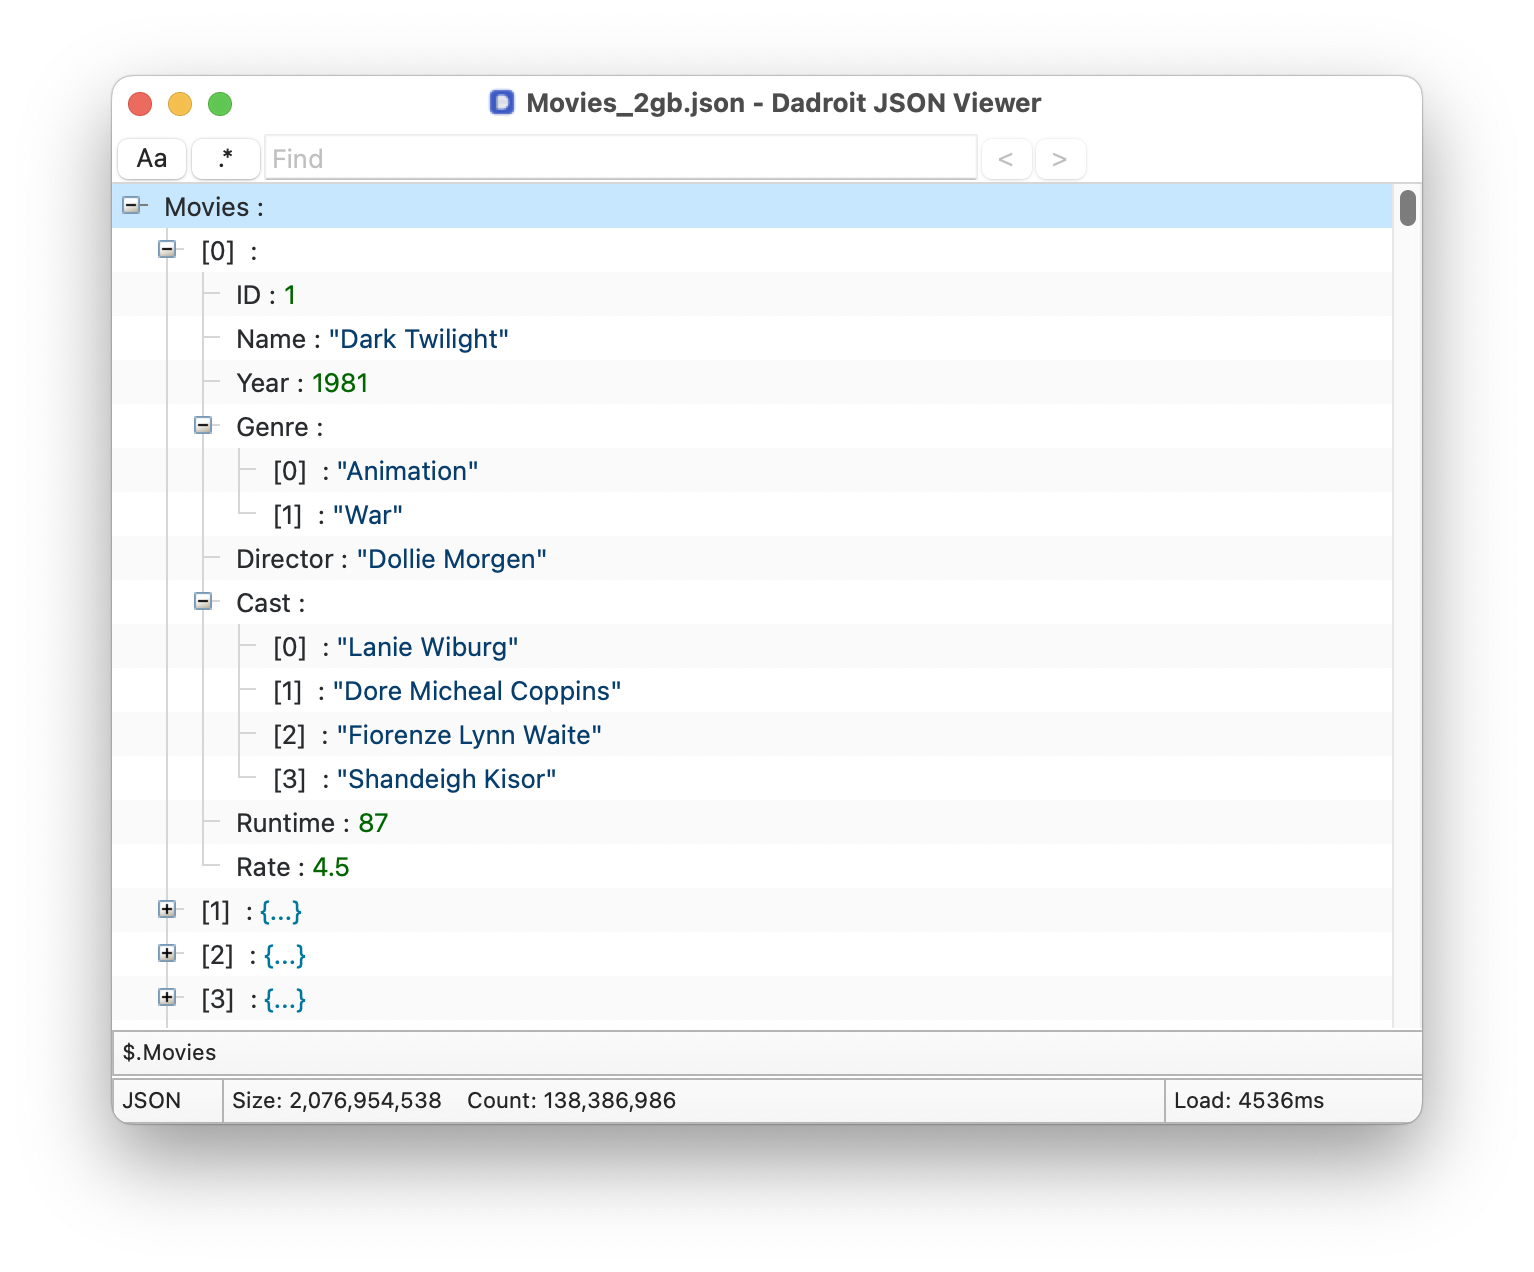 Opening a 2GB movies JSON file in the Dadroit JSON Viewer application with node tree view interface.